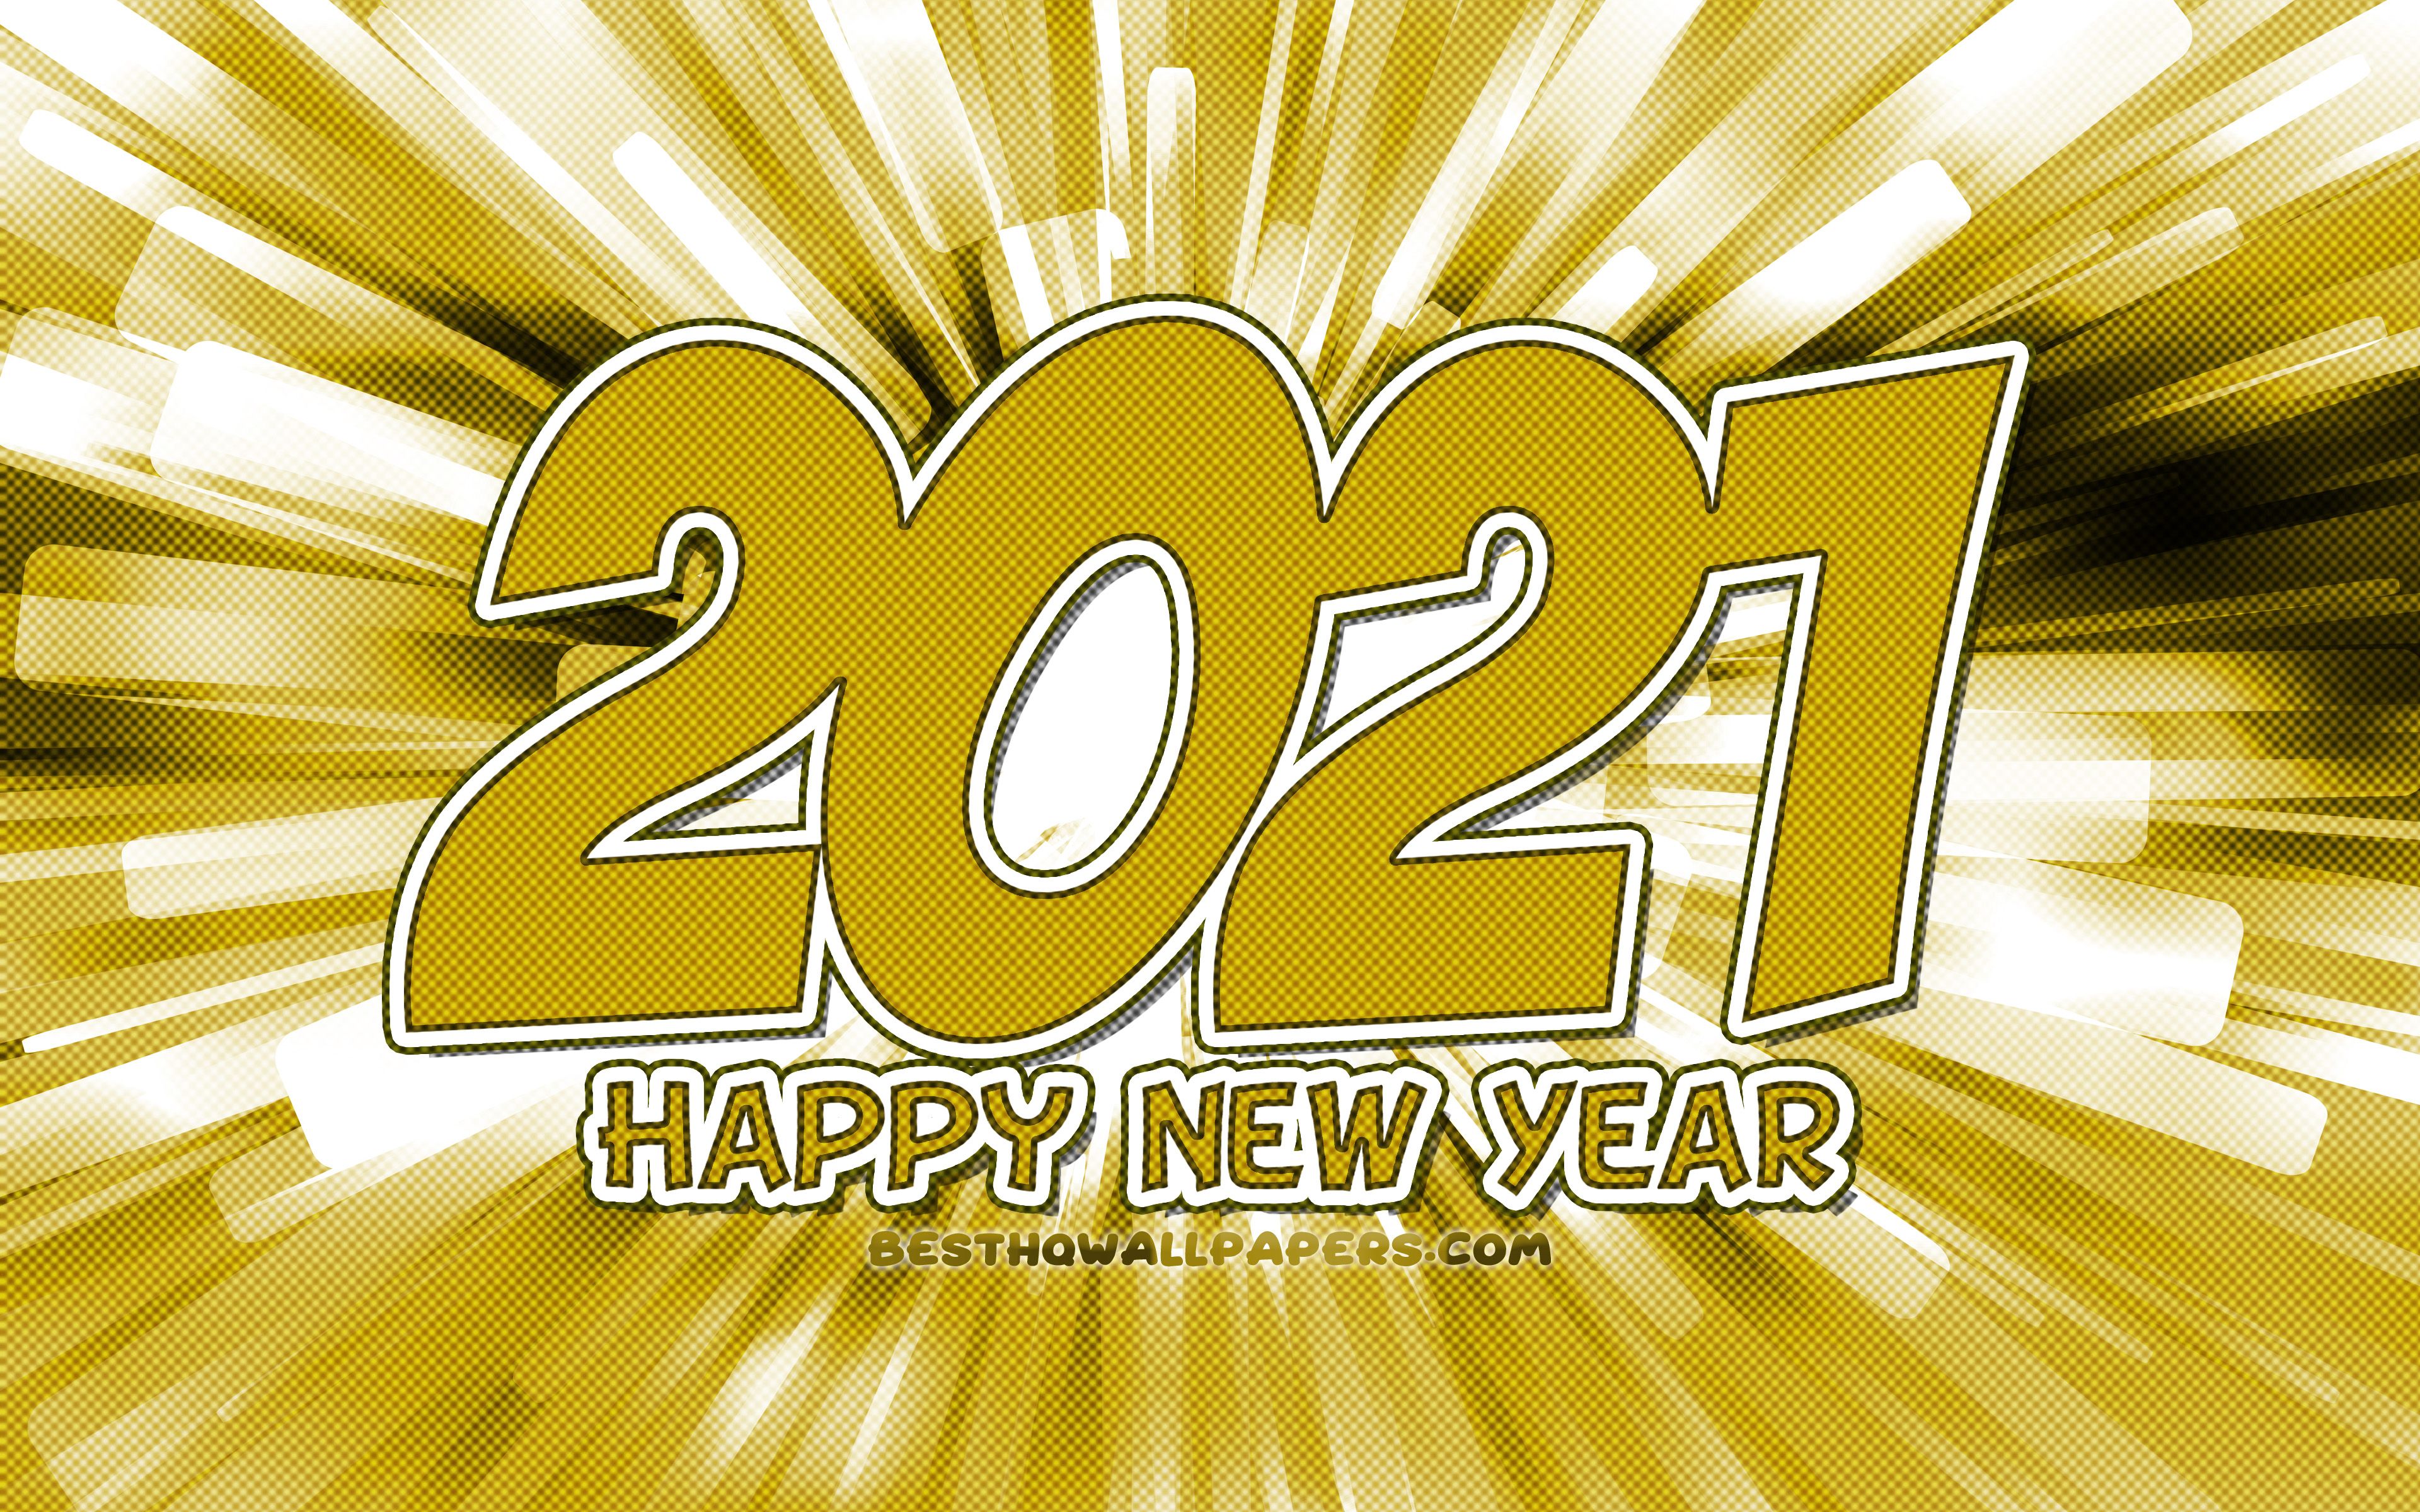 Download wallpapers Happy New Year 2021, 4k, yellow abstract rays, 2021 new year, 2021 yellow digits, 2021 concepts, 2021 on yellow background, 2021 year digits for desktop with resolution 3840x2400. High Quality HD pictures wallpapers